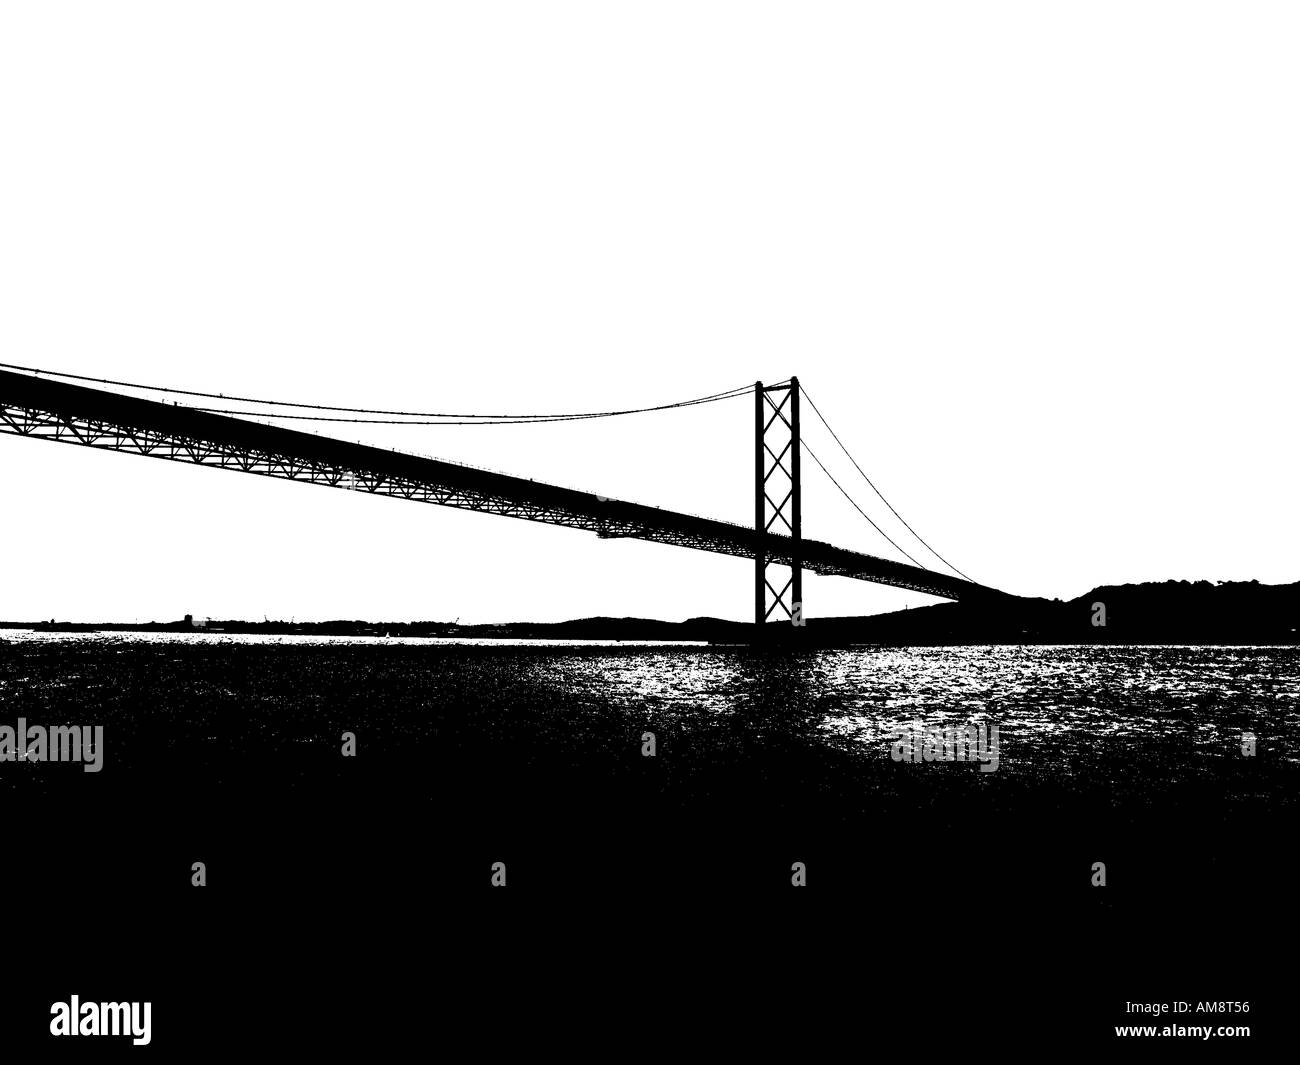 Forth road bridge shot from underneath Stock Photo